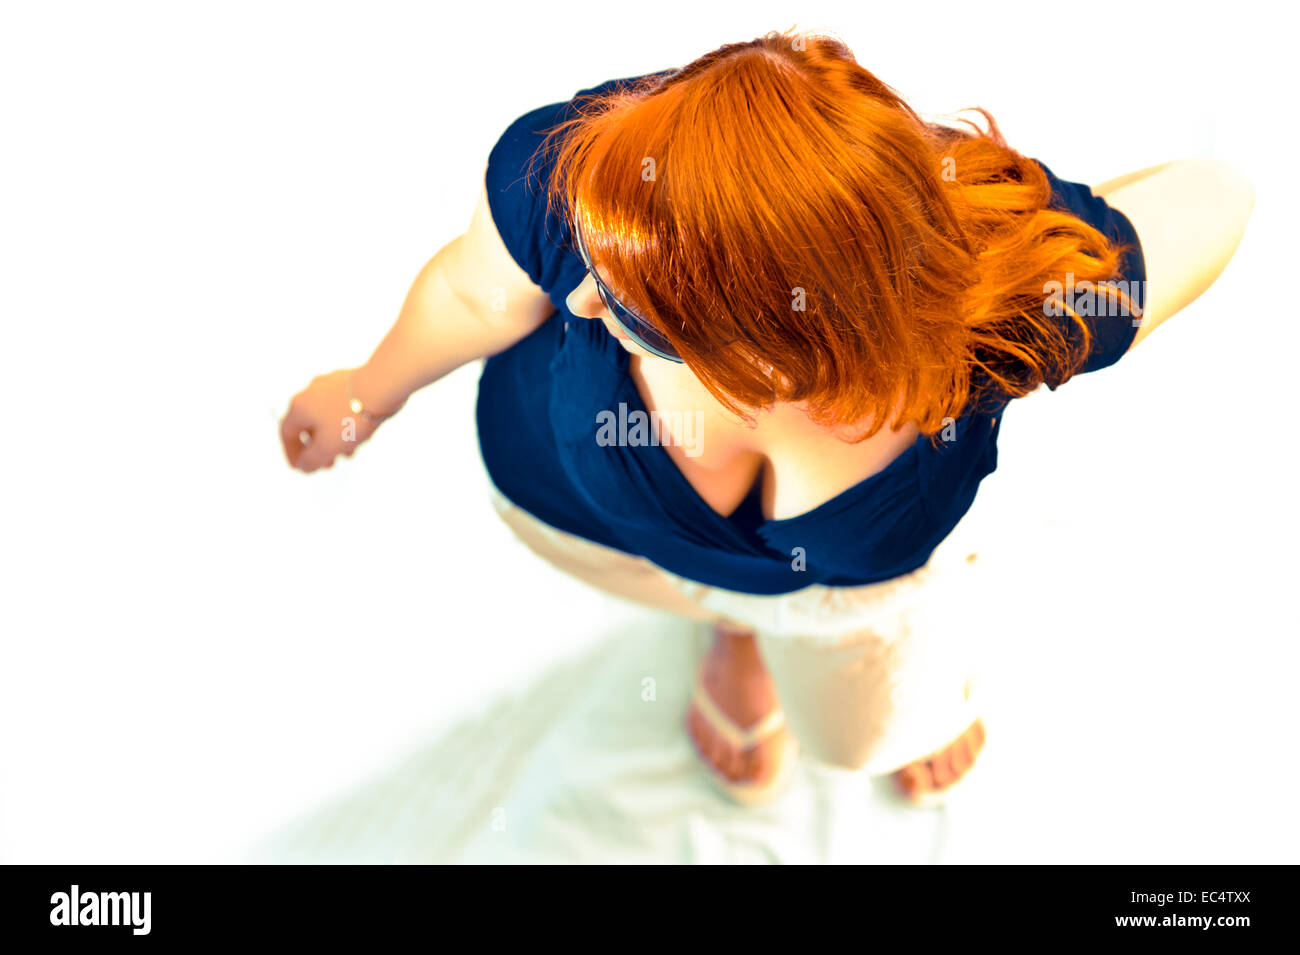 young woman from a bird s eye view Stock Photo